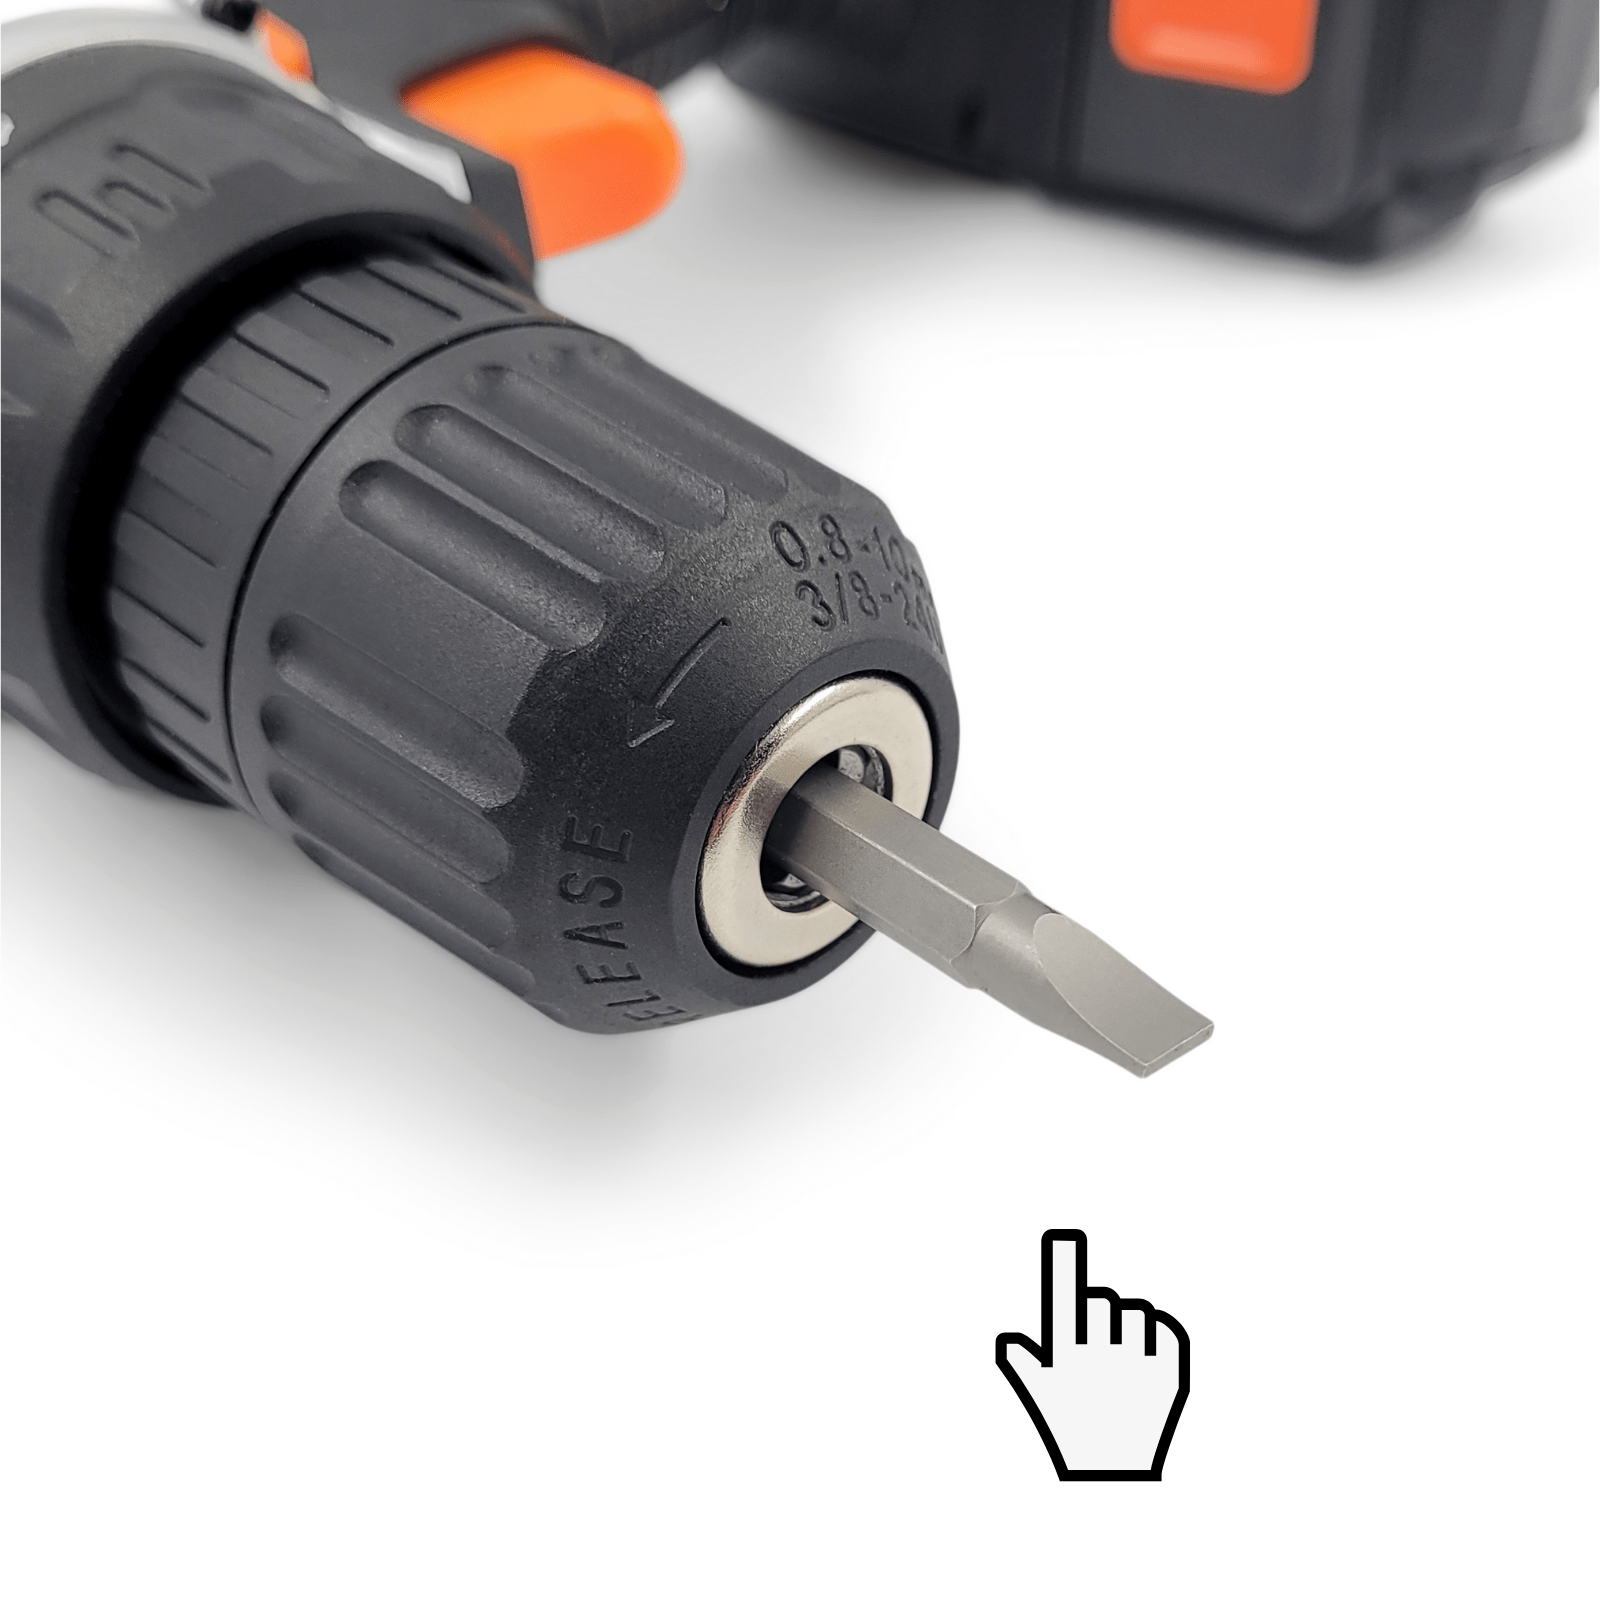 Impact Driver Bit for Drill - Double End Phillips and Slotted